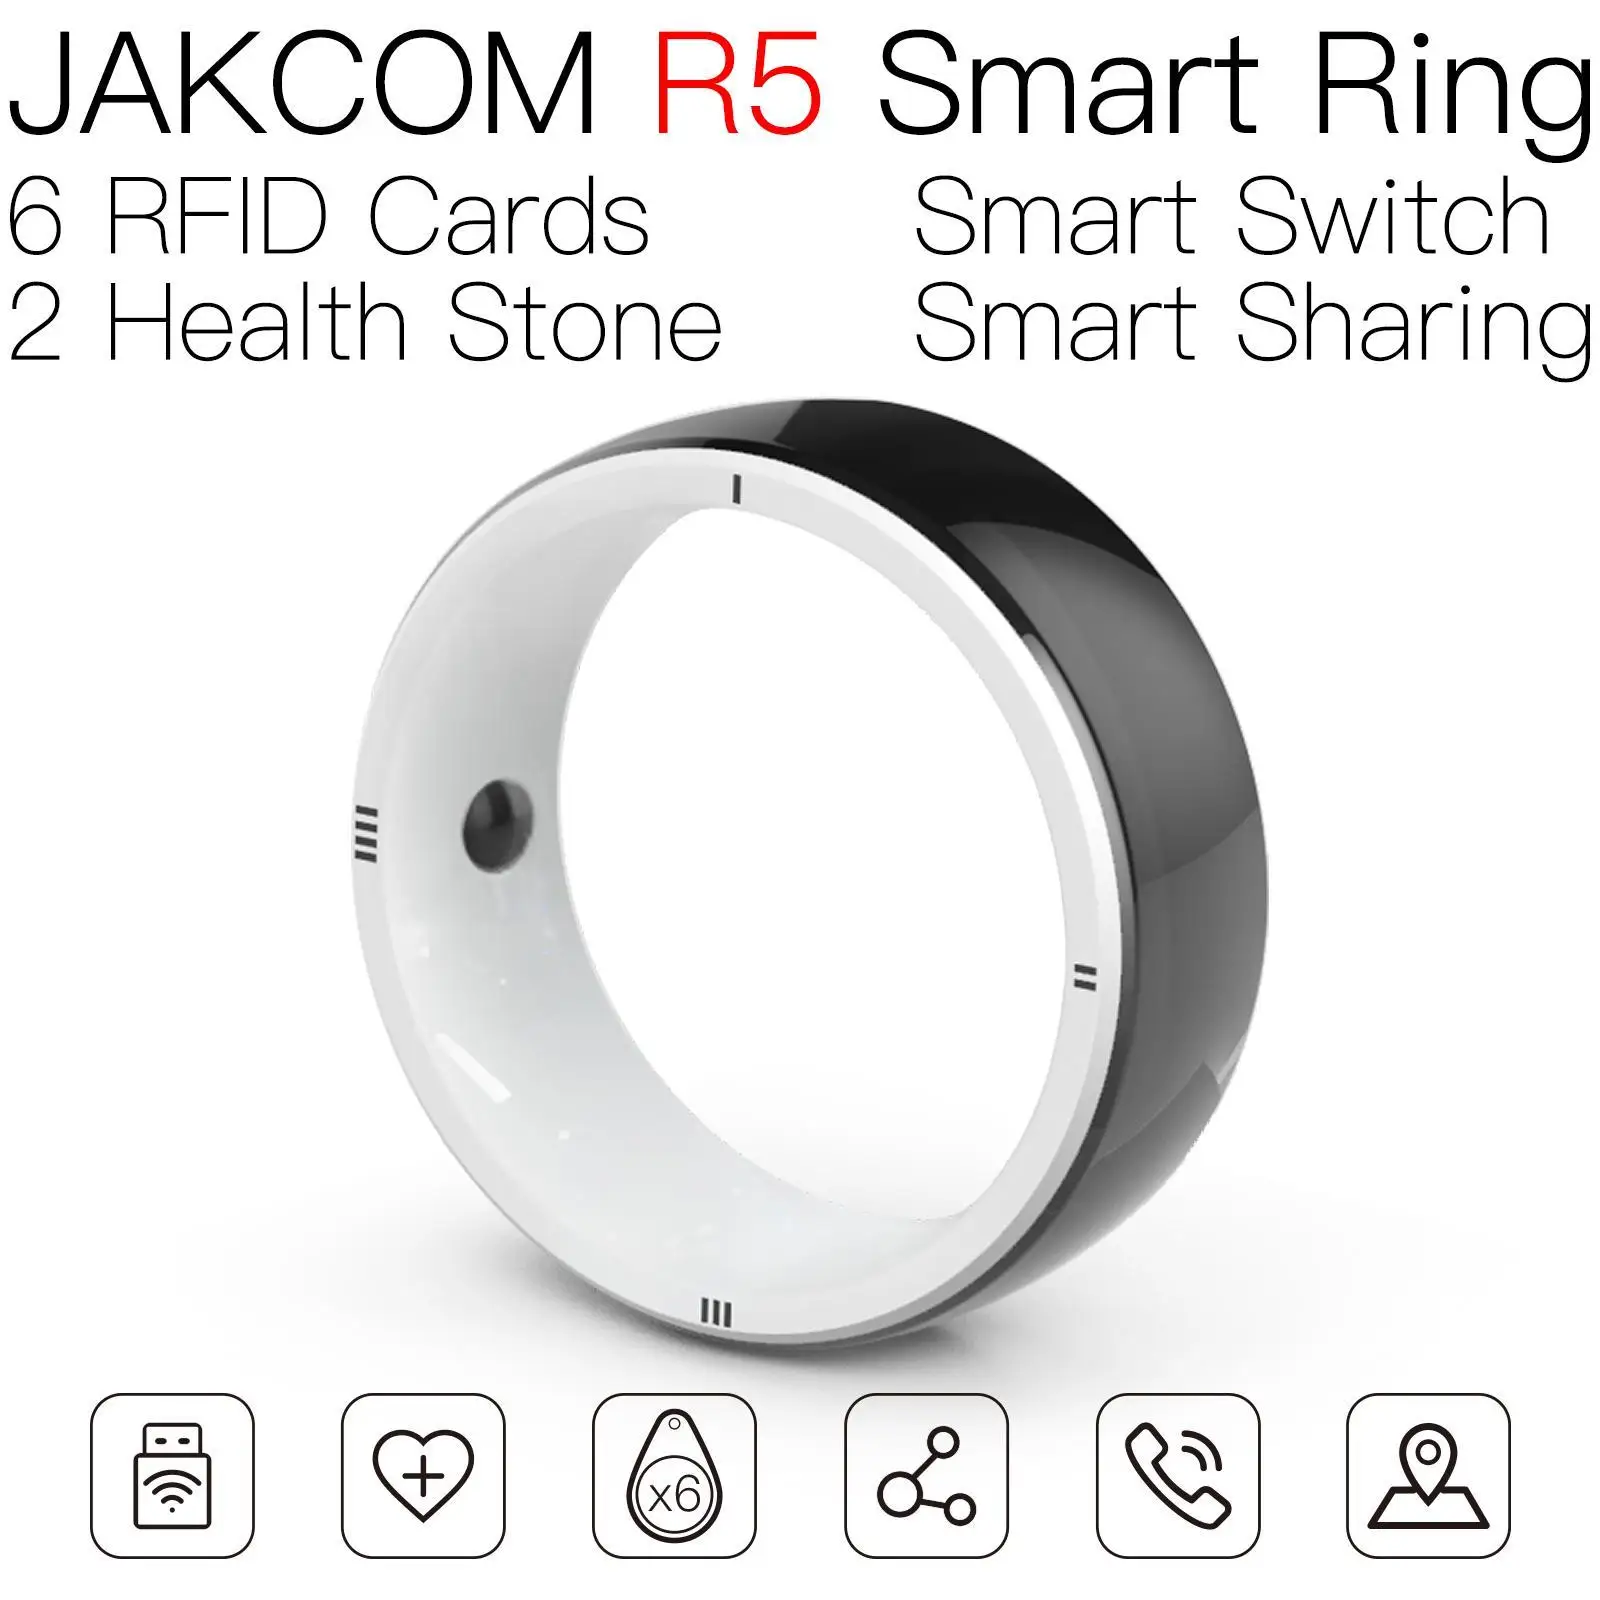 JAKCOM R5 Smart Ring New product as electric smart drill i12 smartch watch ladies free shipping bracelets smartwatch